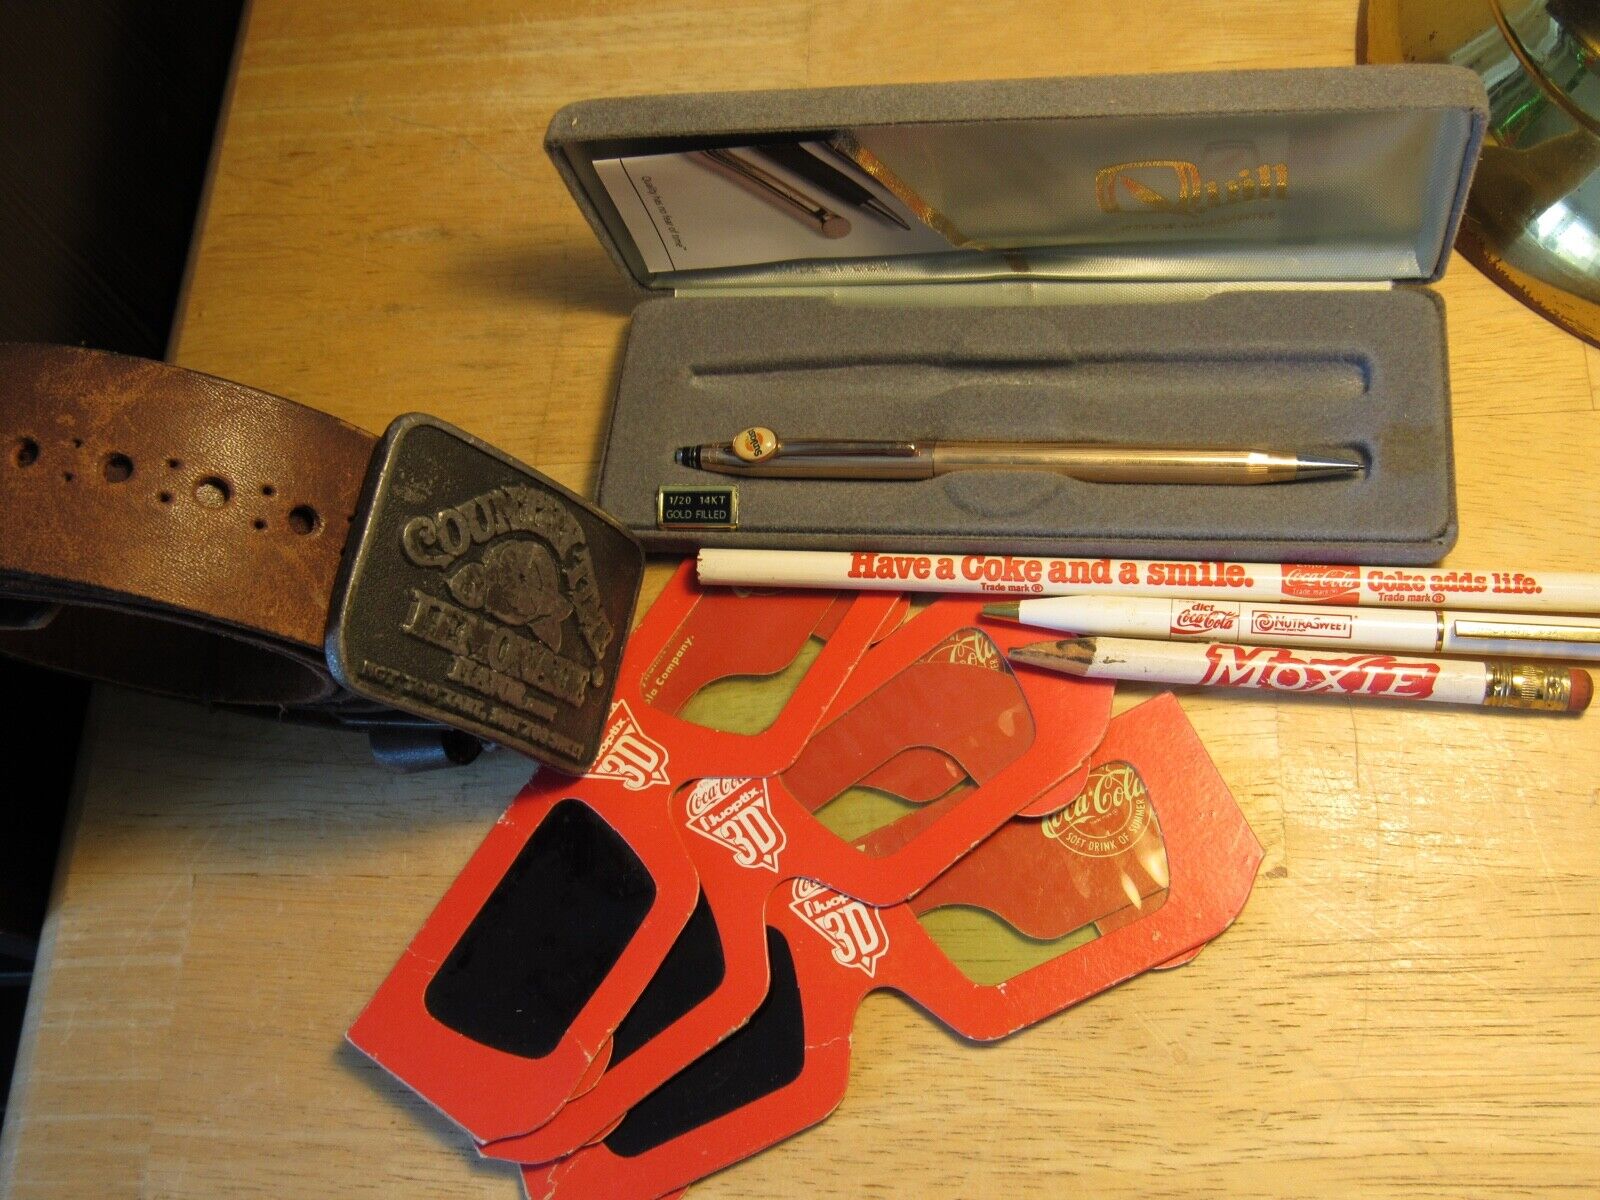 Lot / 19 Coca Cola Asst. Items - Pencils Glasses Countrytime Belt Matches Cards